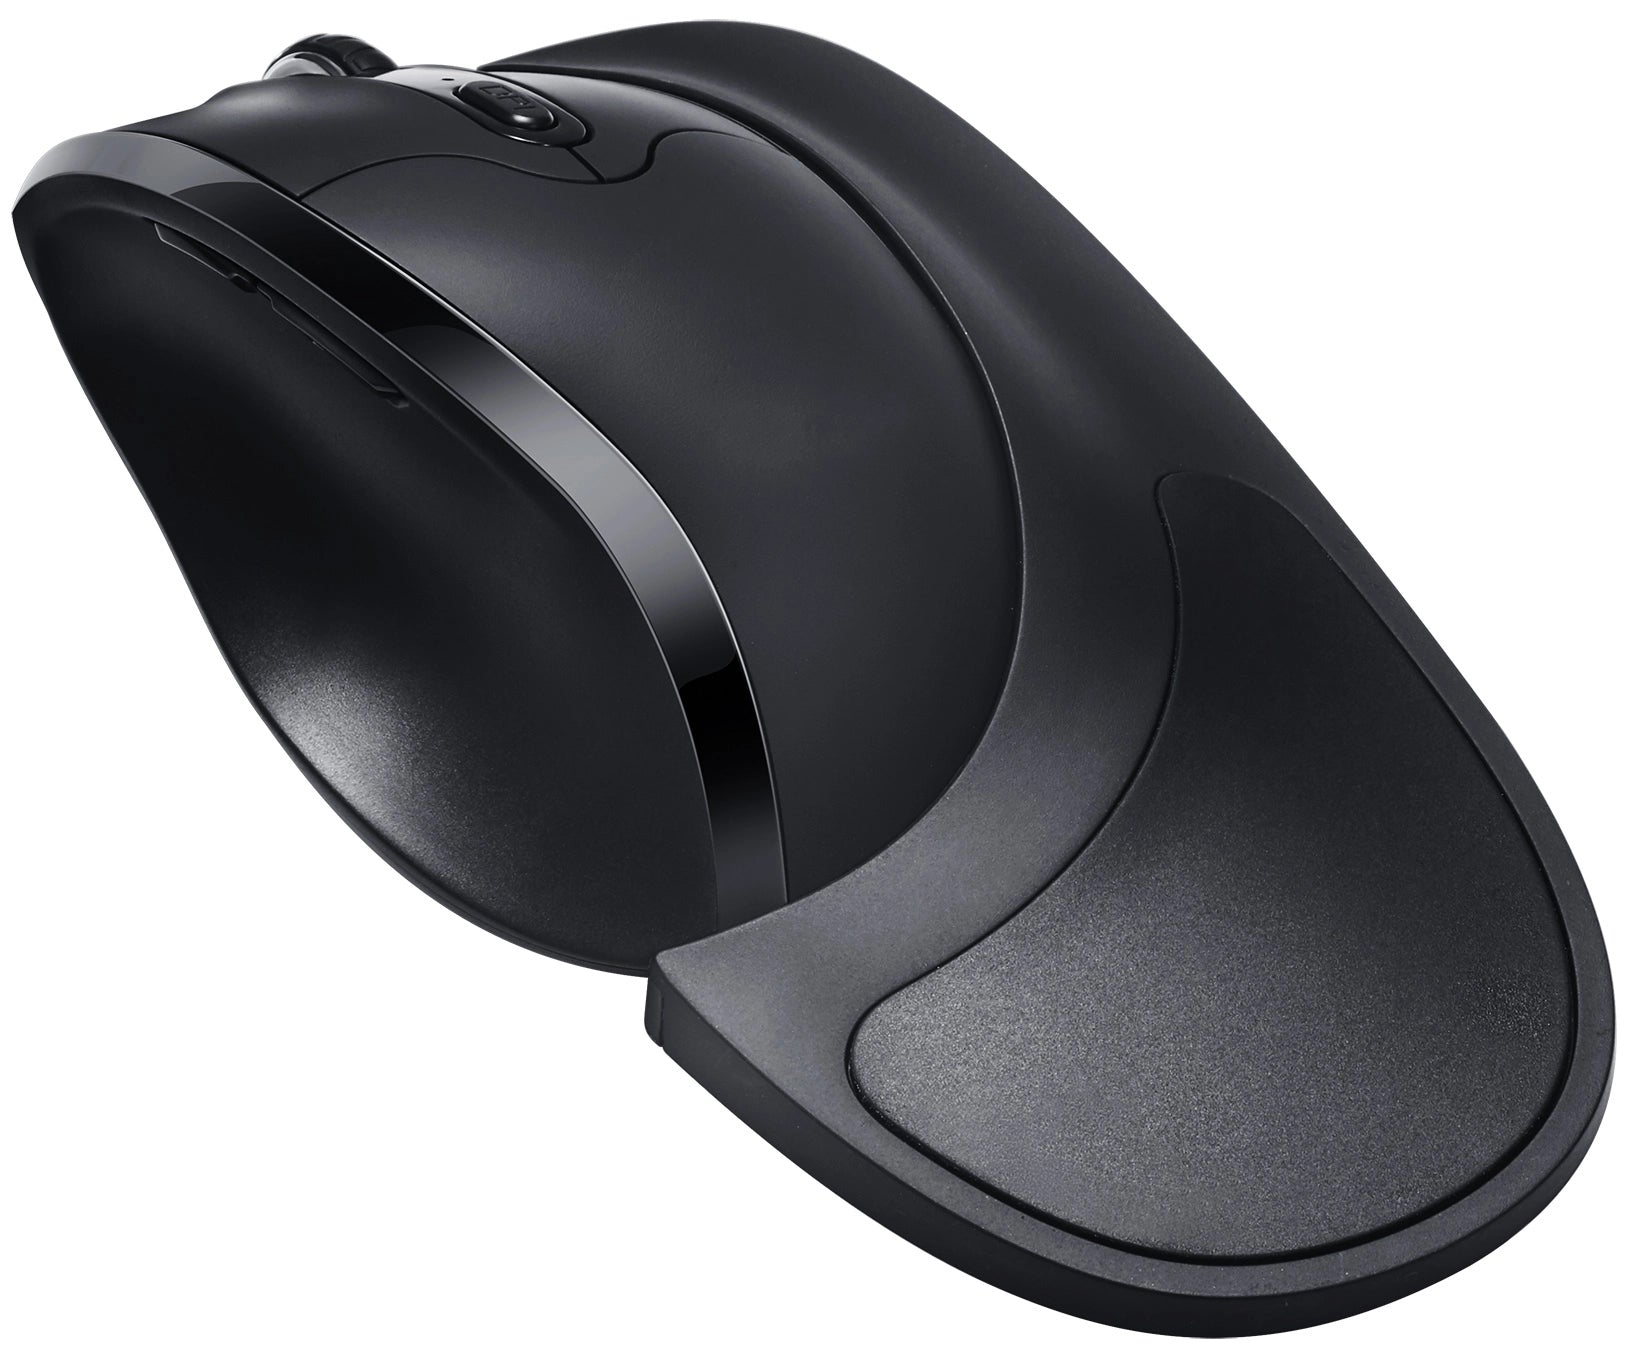 Newtral 3 Mouse - Small Wireless